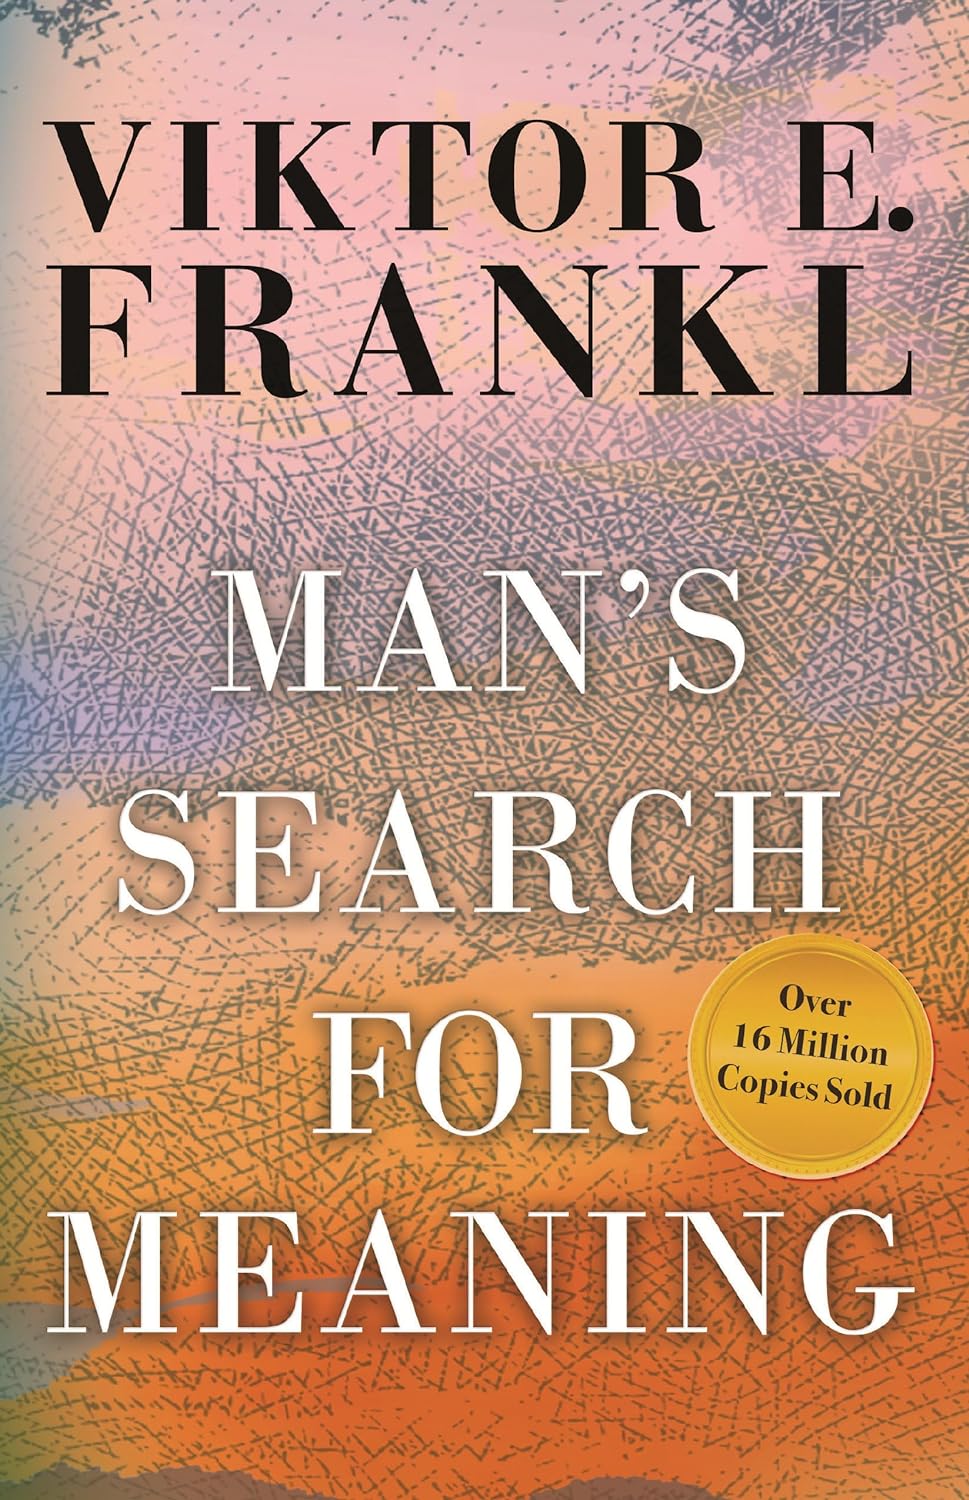 Man's Search for Meaning by Viktor Frankl